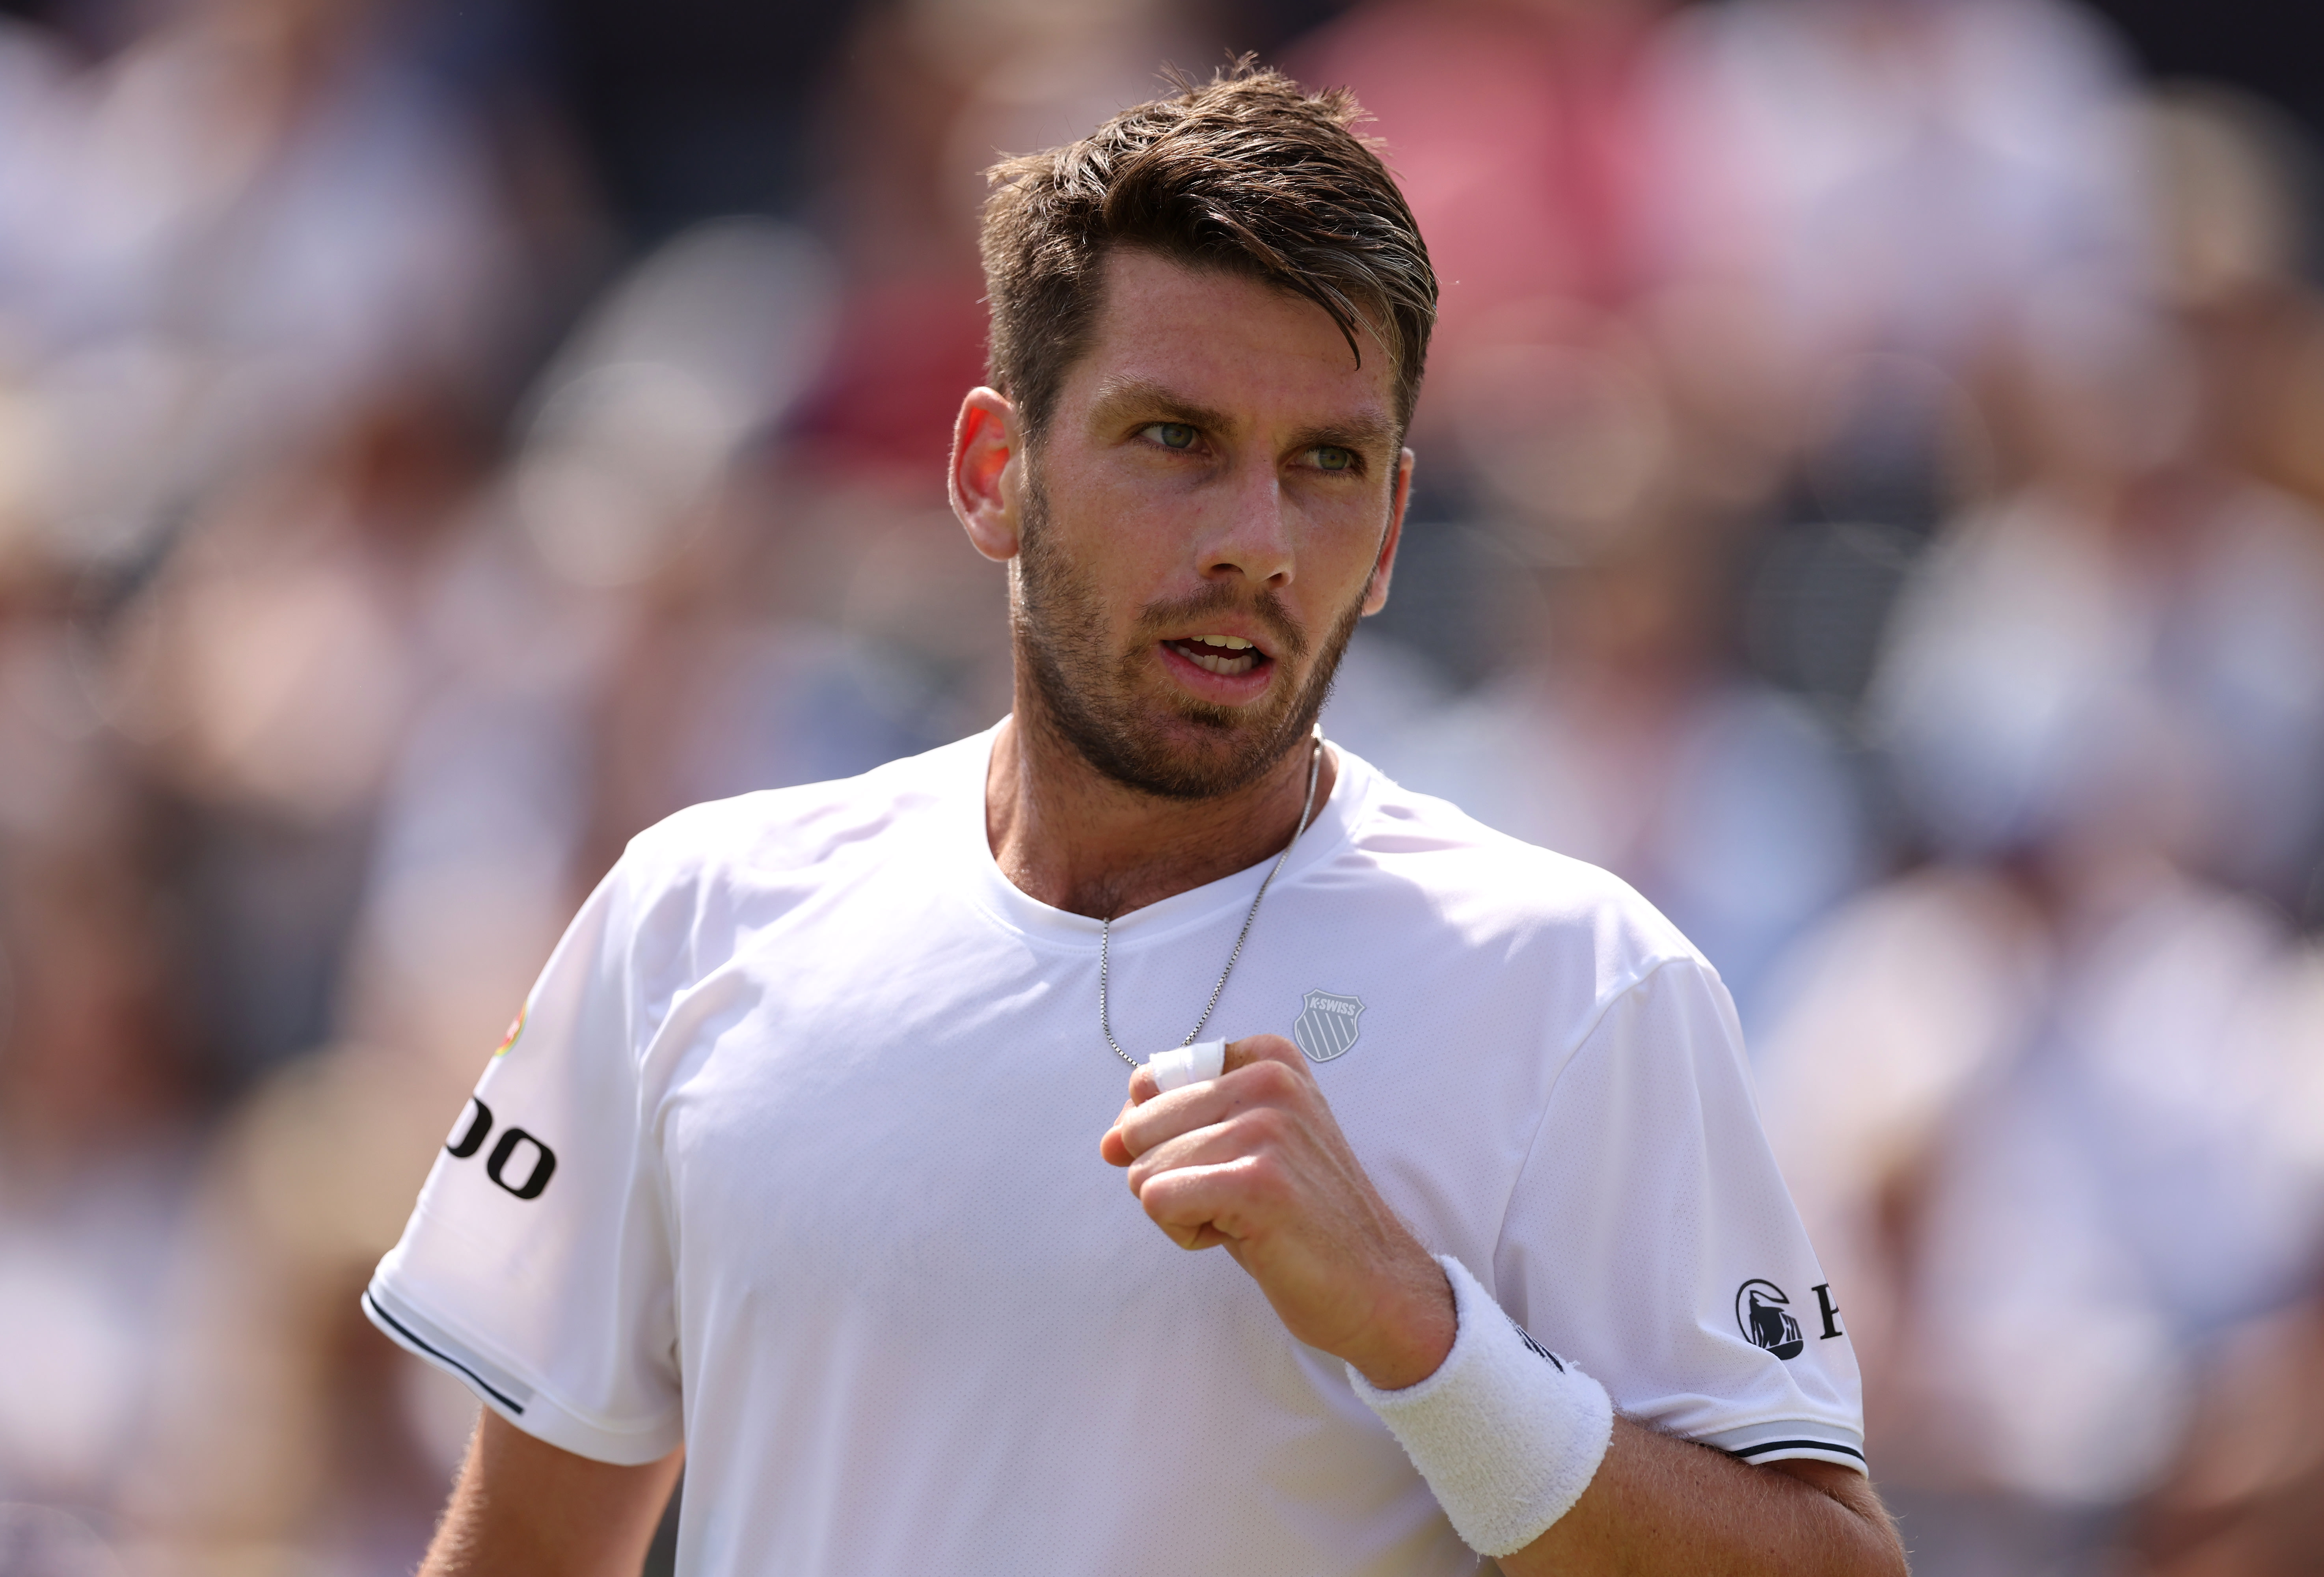 Cameron Norrie launches Queens Club bid with first-round win, Lorenzo Musetti also through